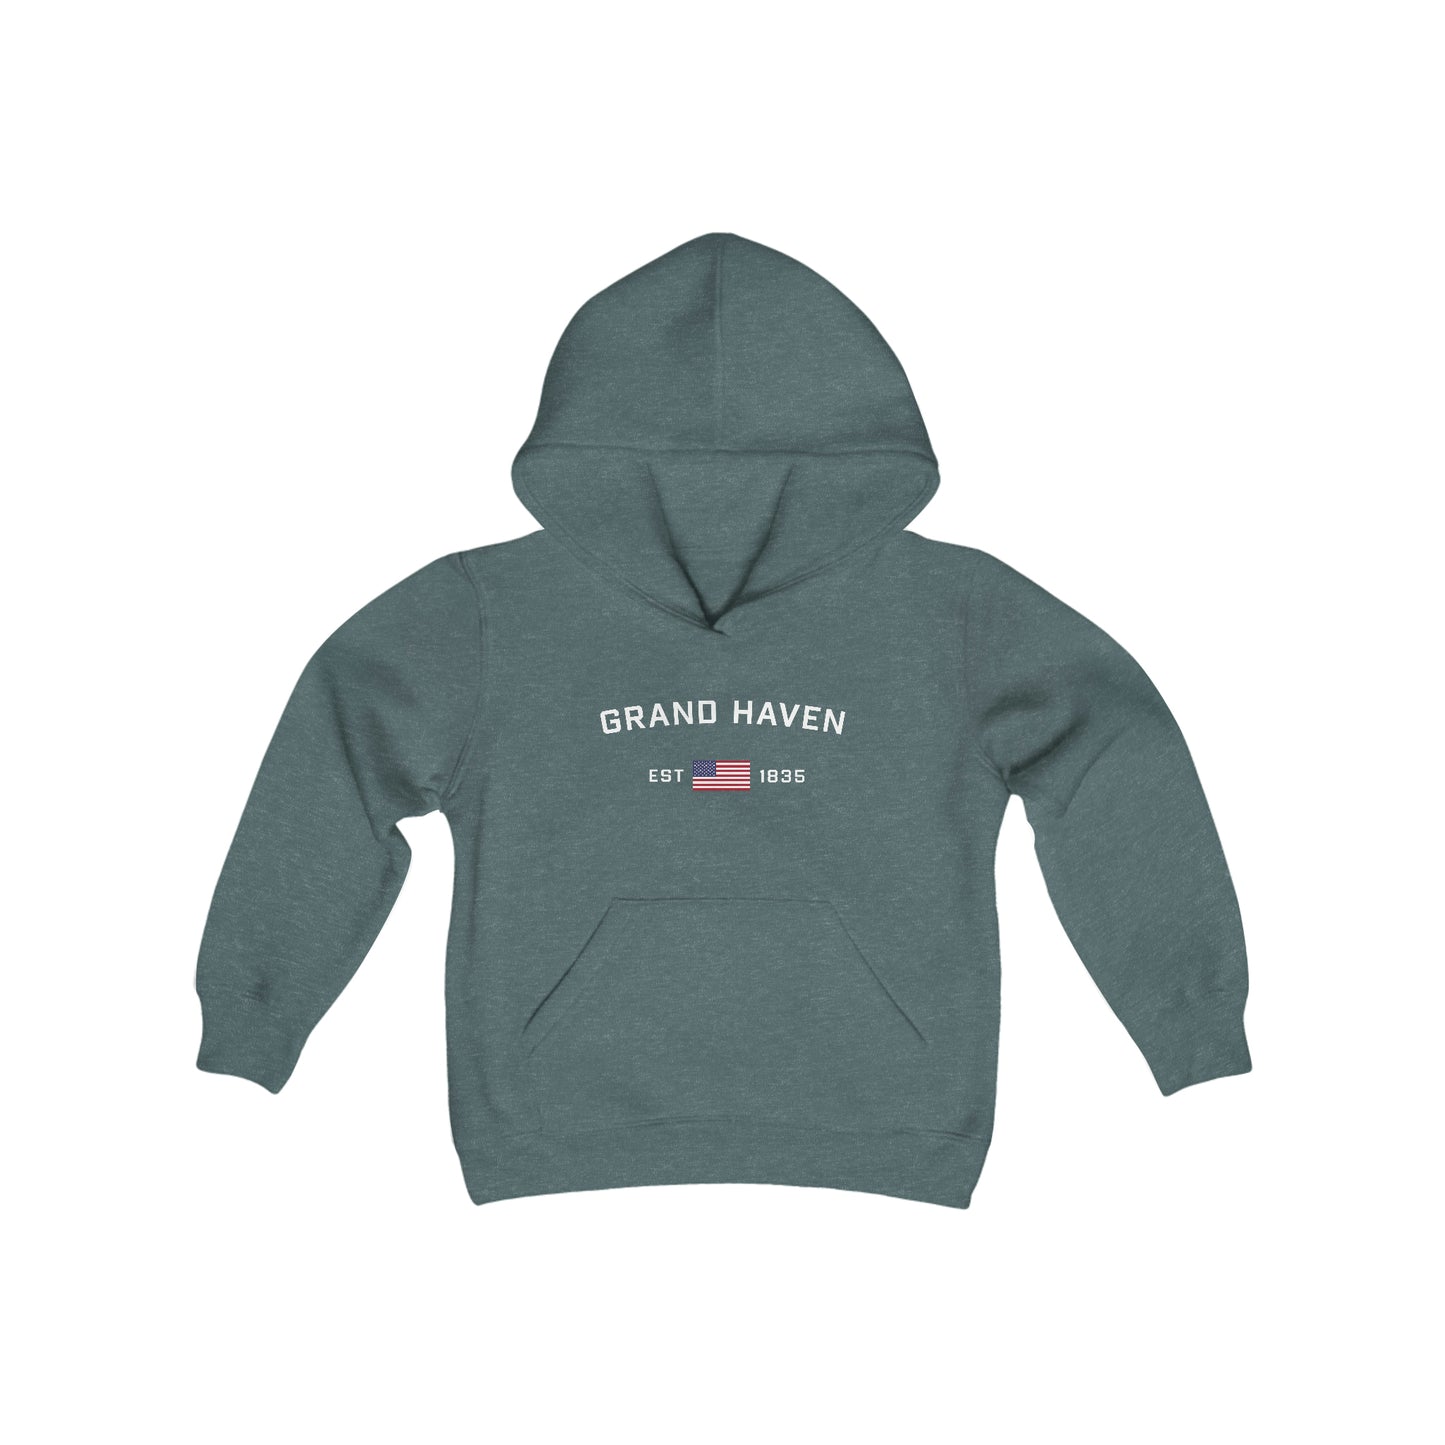 'Grand Haven EST 1835' Hoodie (w/USA Flag Outline) | Unisex Youth